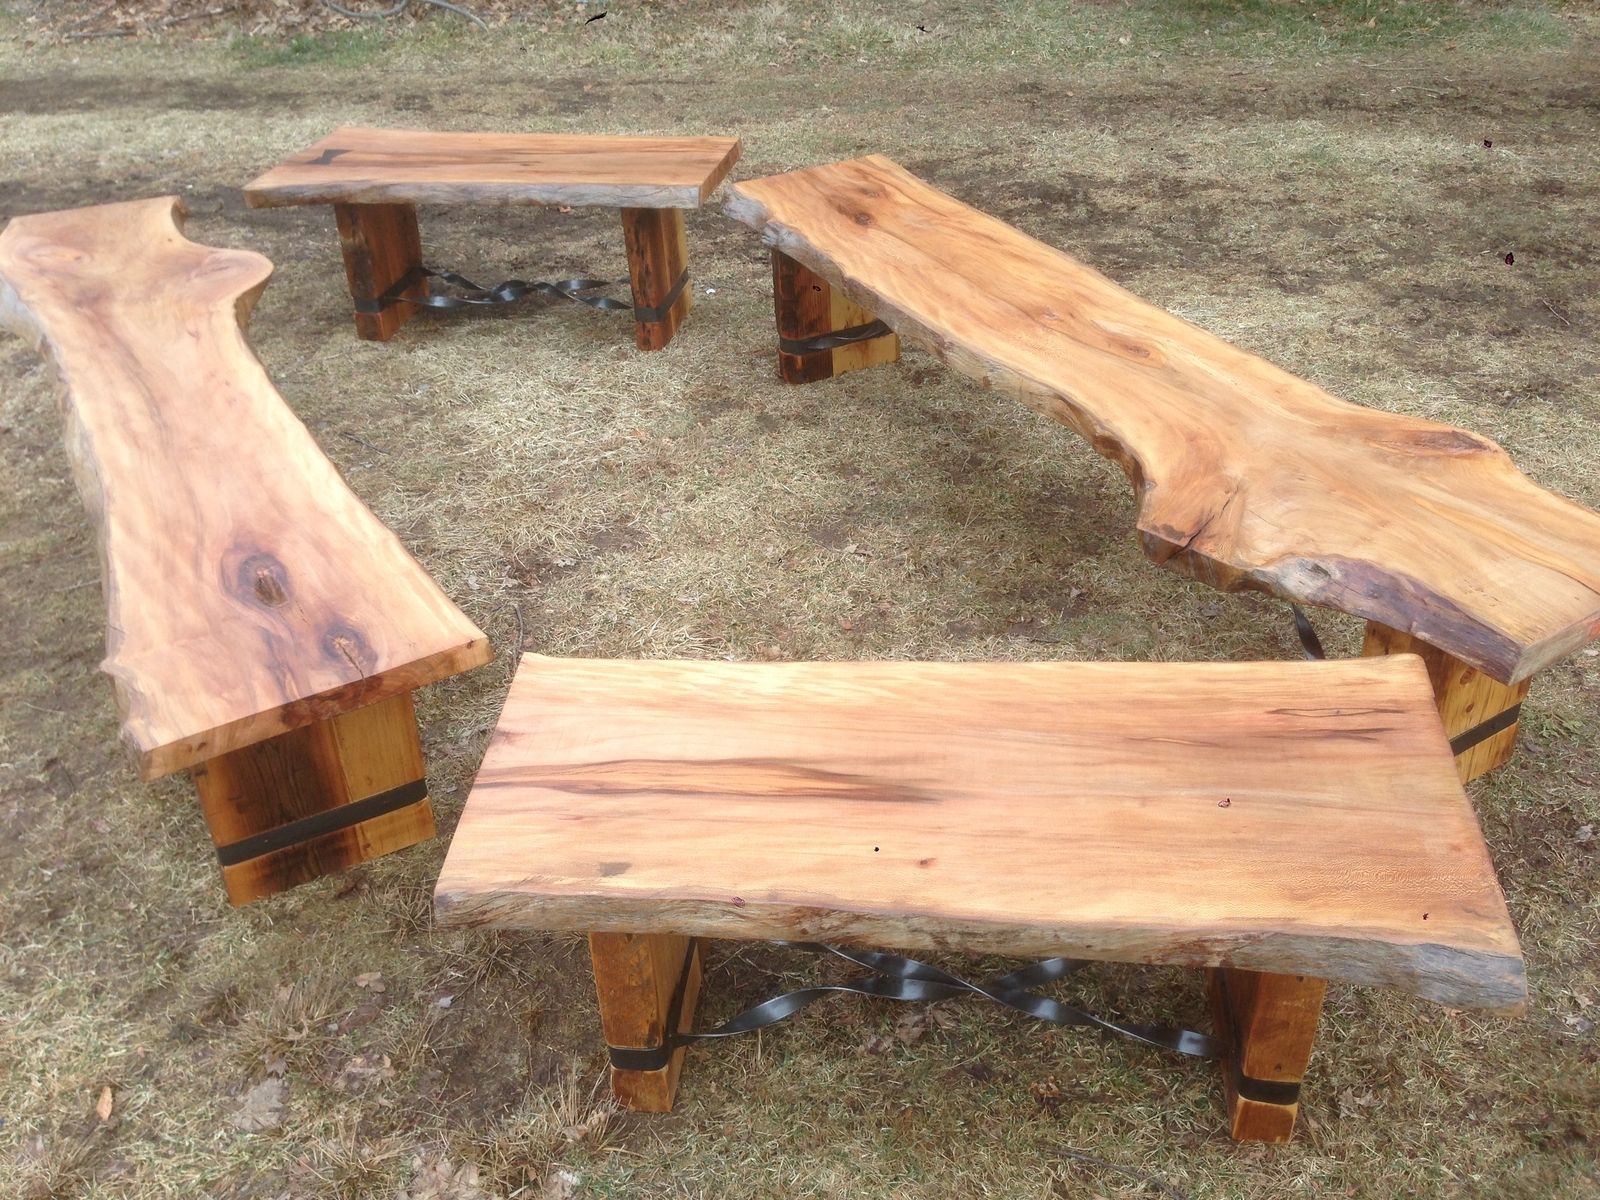 Hand Crafted Slab Benches by Endless Design CustomMade.com